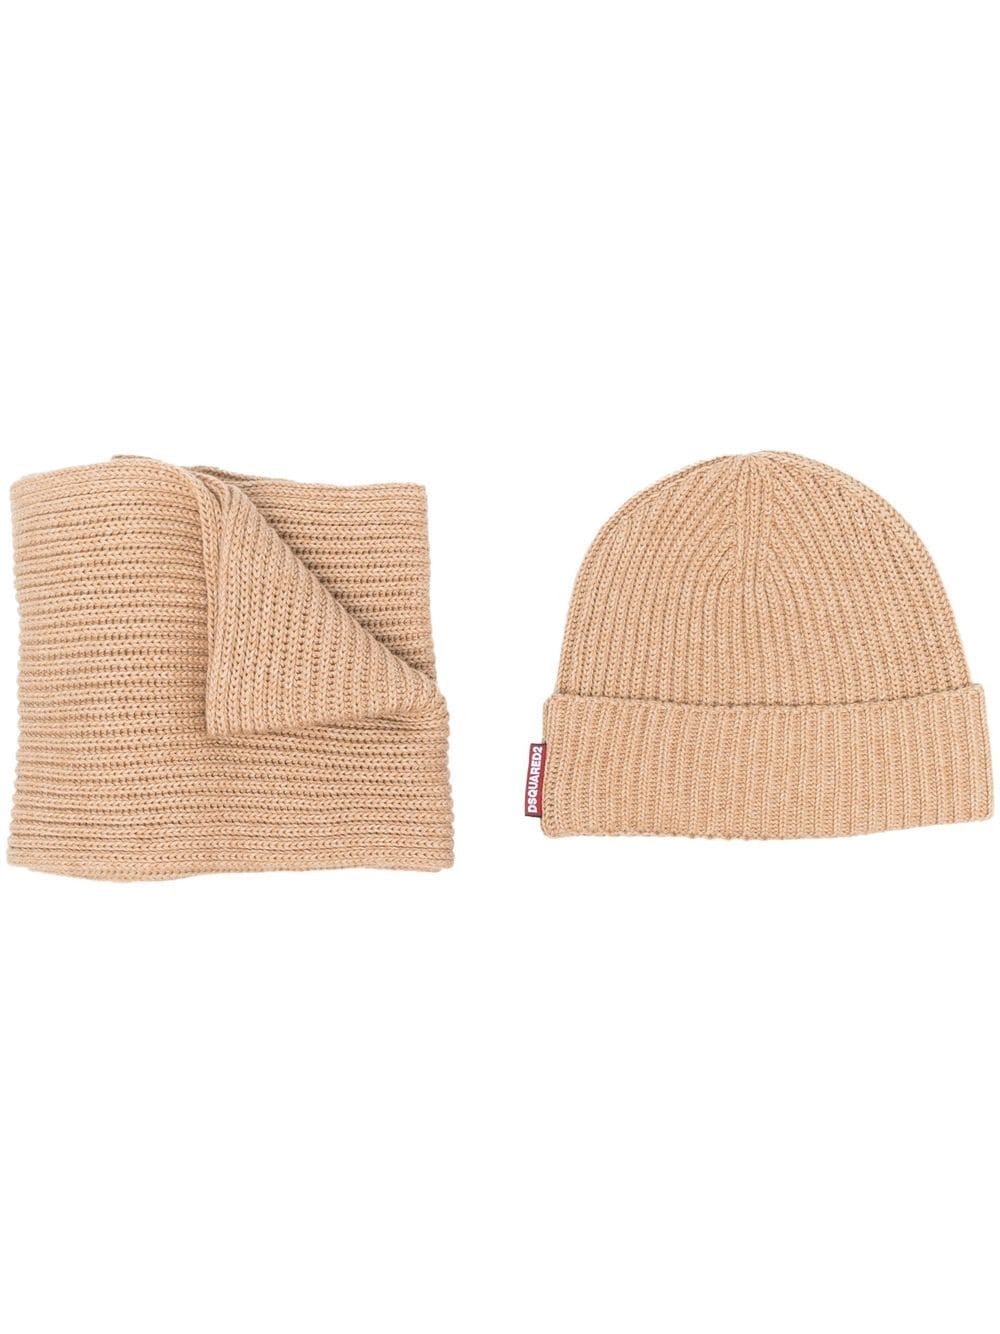 Dsquared2 knitted beanie hat and scarf set - Neutrals von Dsquared2